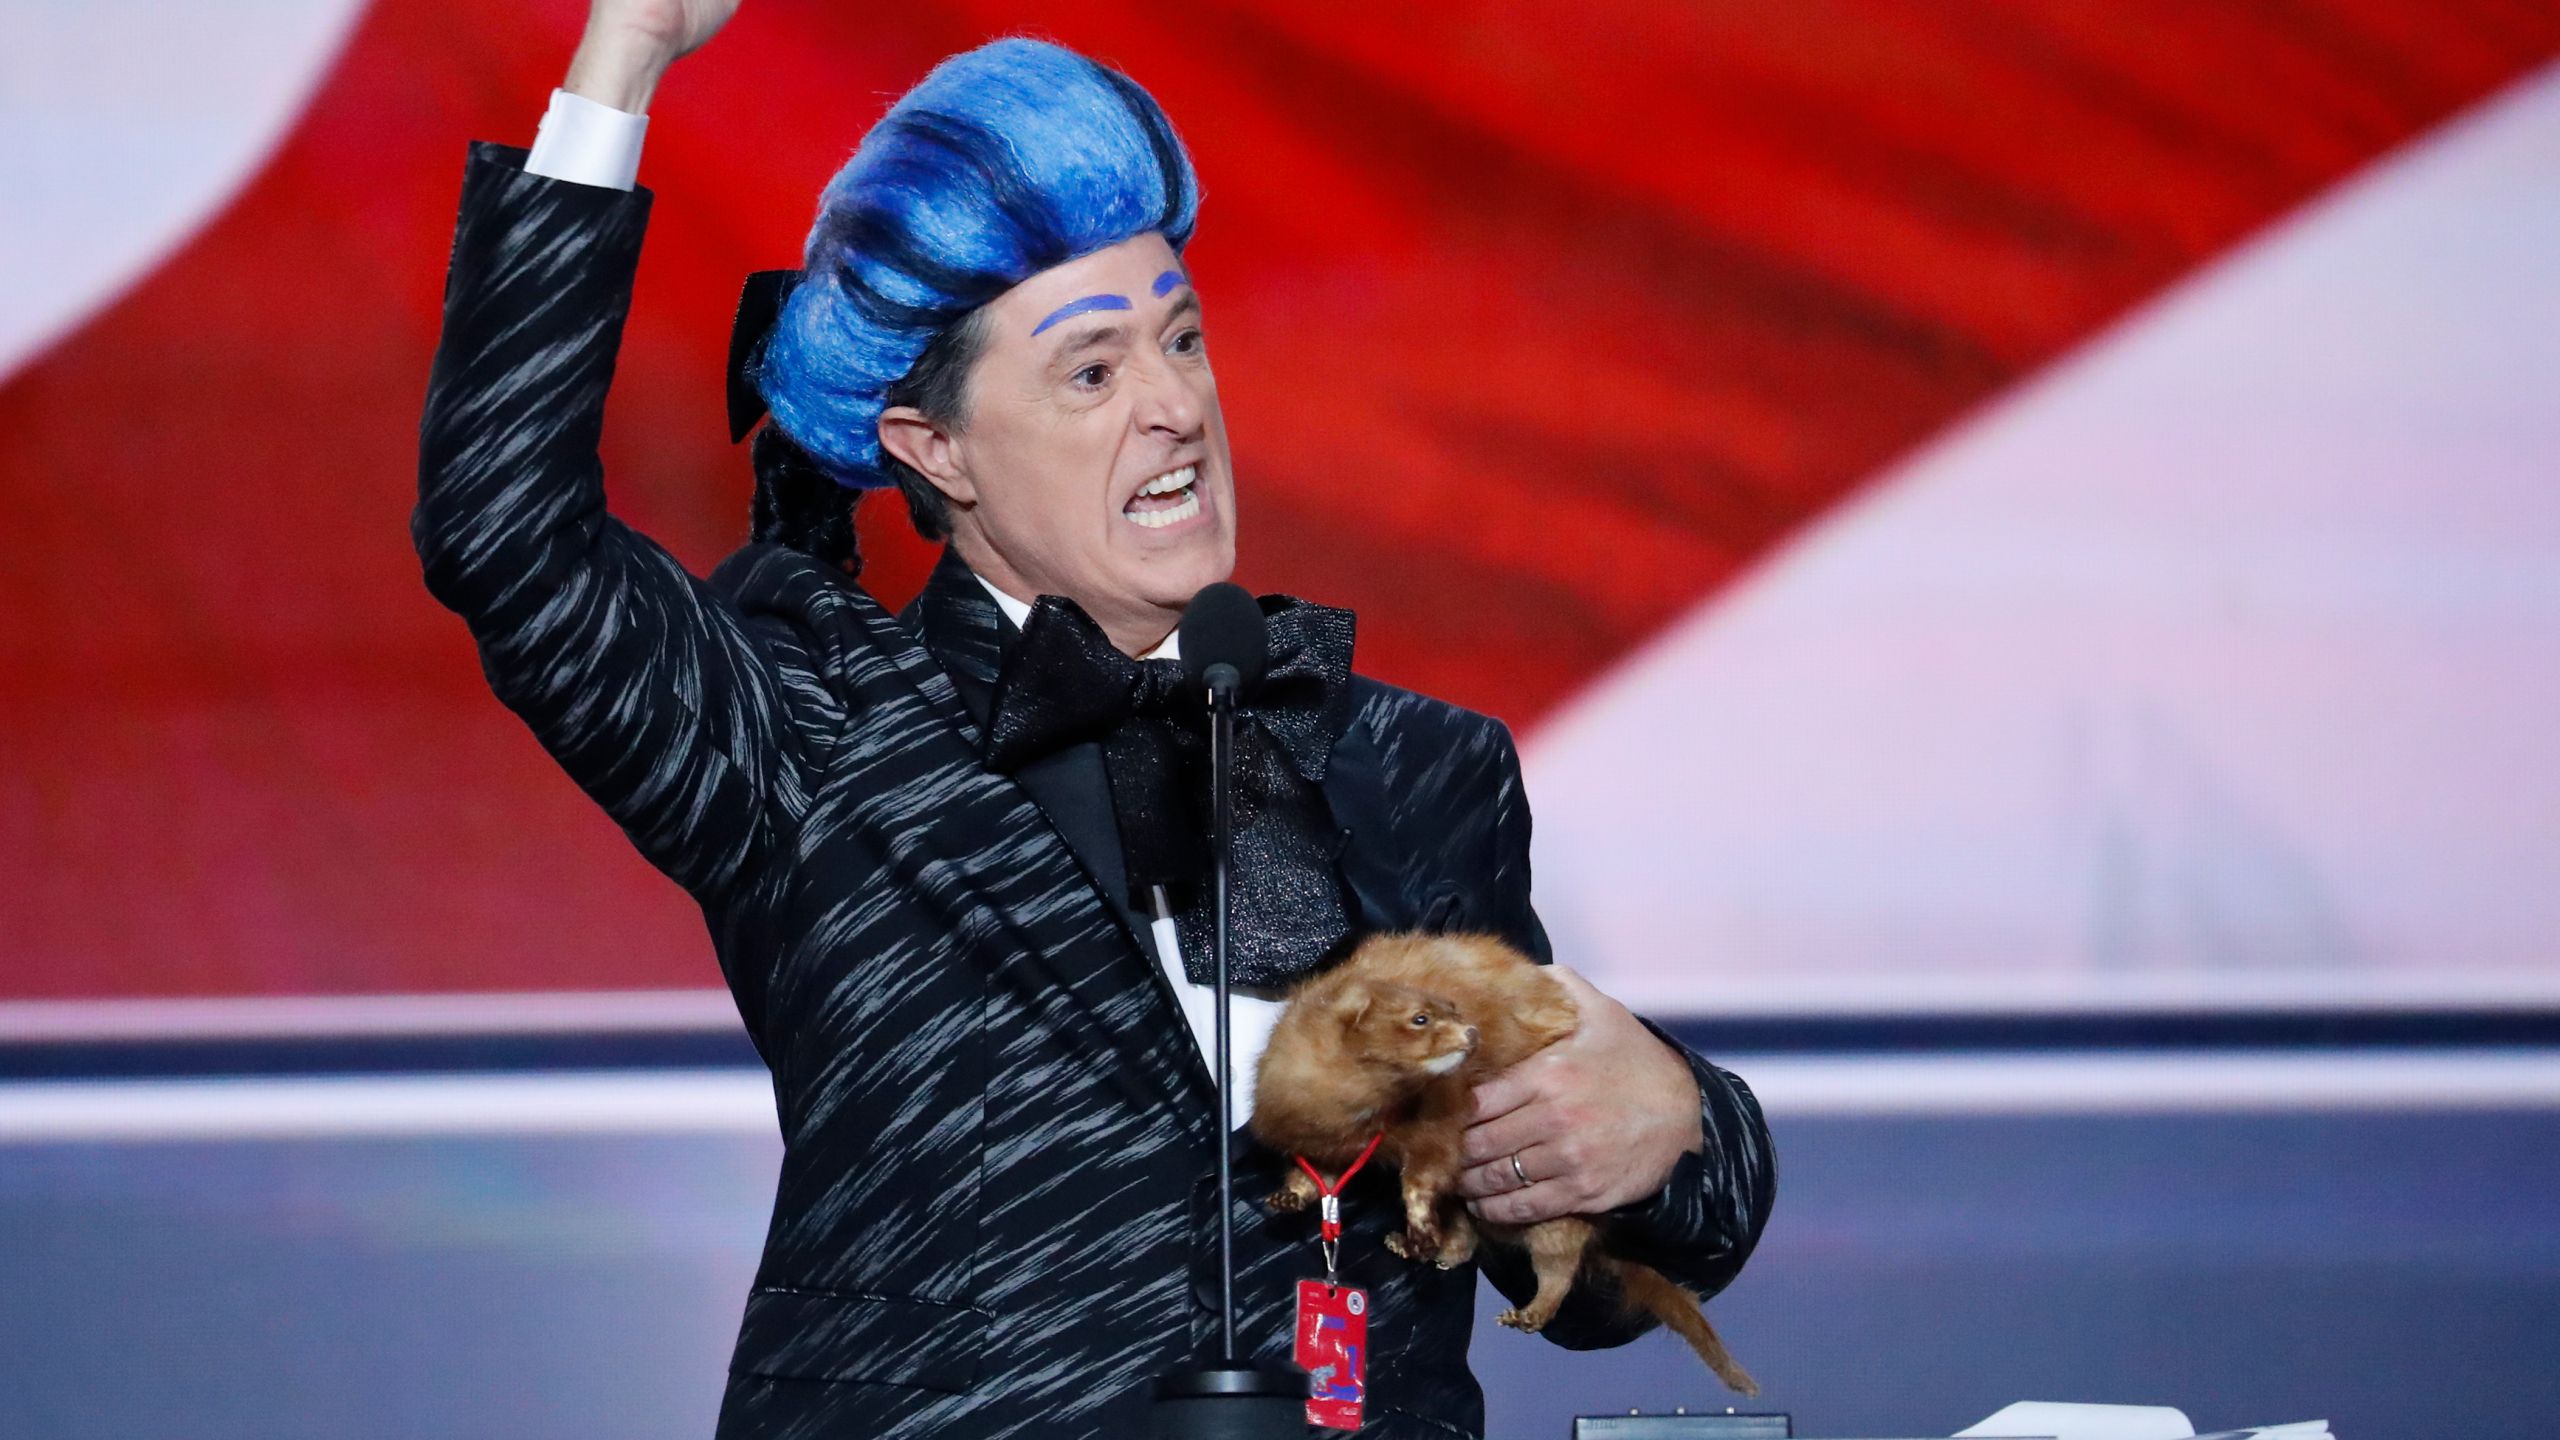 Stephen Colbert crashes RNC stage for 'Hunger Games' prank